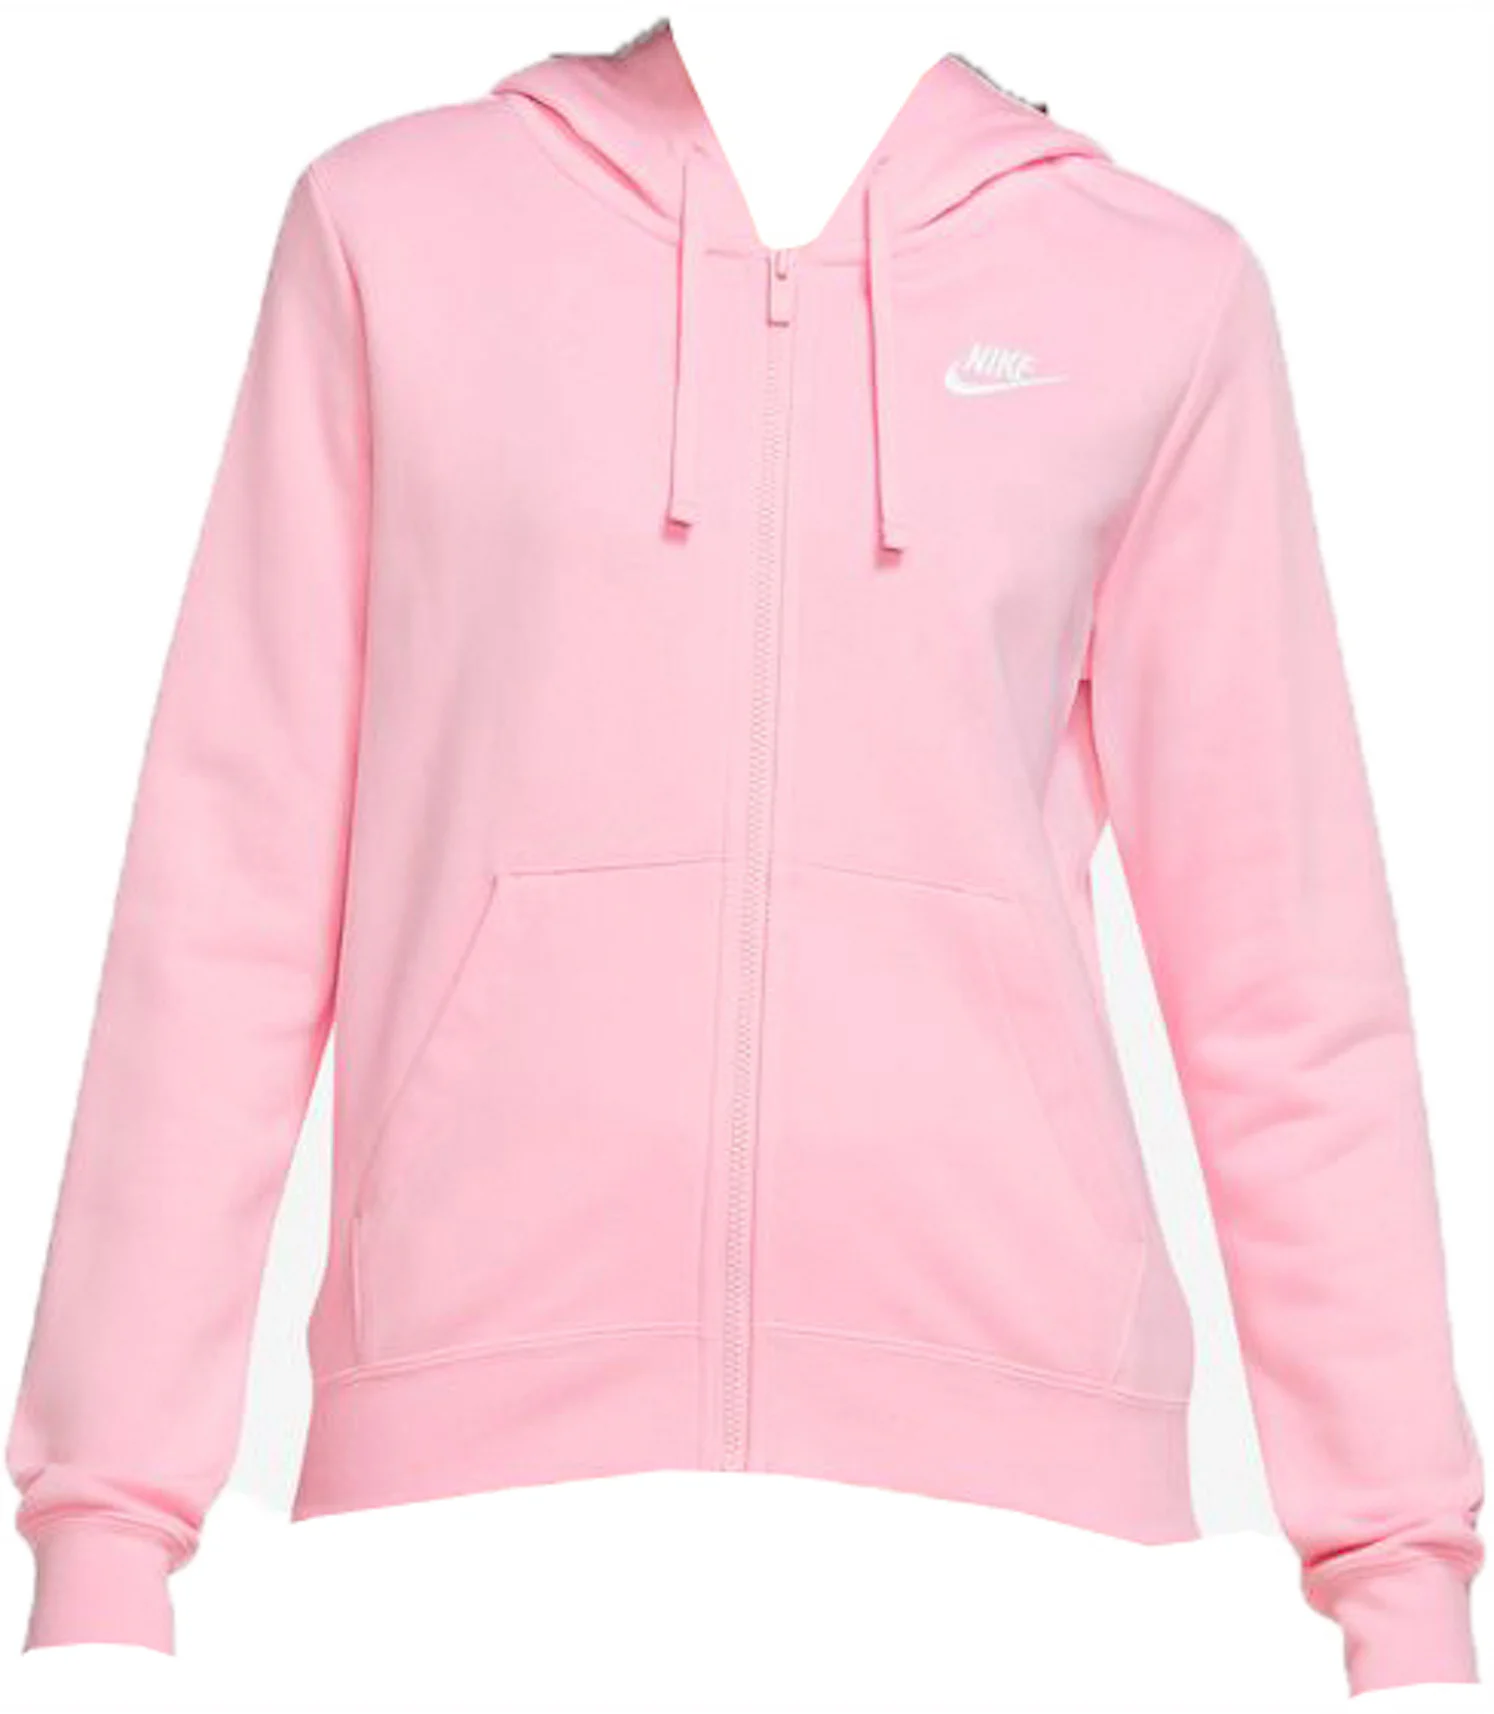 https://images.stockx.com/images/Nike-Sportswear-Womens-Club-Fleece-Full-Zip-Hoodie-Med-Soft-Pink-White.jpg?fit=fill&bg=FFFFFF&w=1200&h=857&fm=webp&auto=compress&dpr=2&trim=color&updated_at=1674511391&q=60